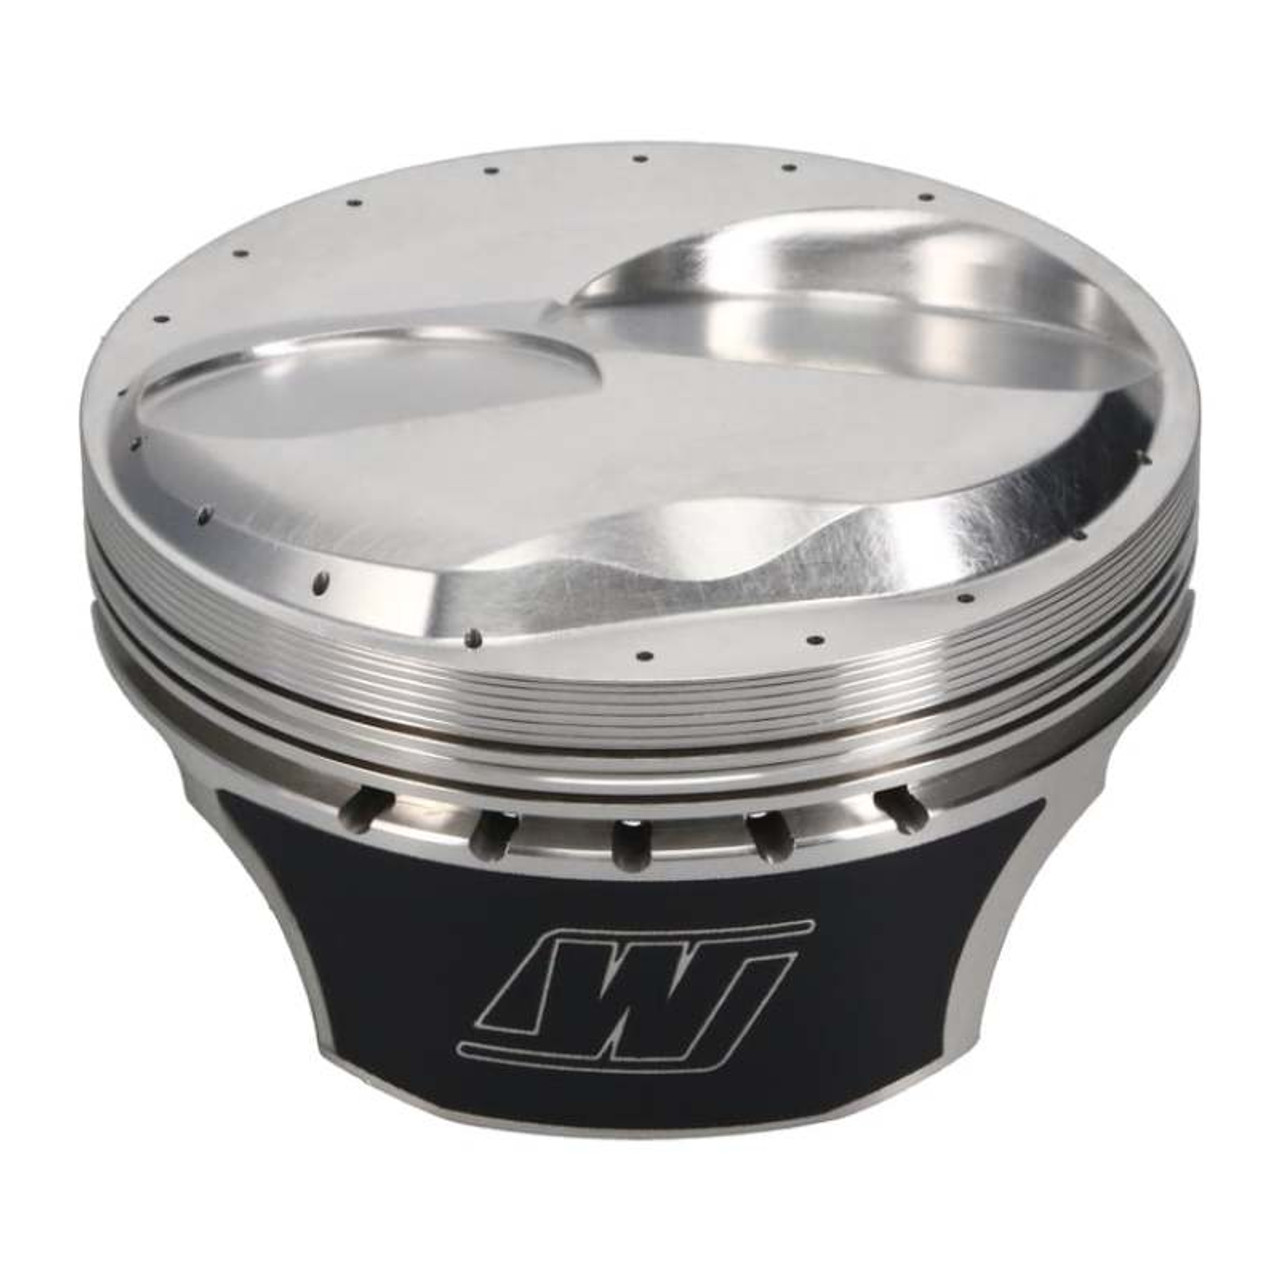 Wiseco Chevrolet Big Blox Brodix SR20 4.600in Bore 1.120in CH 0.990in H Piston Shelf Stock Kit - K0159B100 Photo - out of package